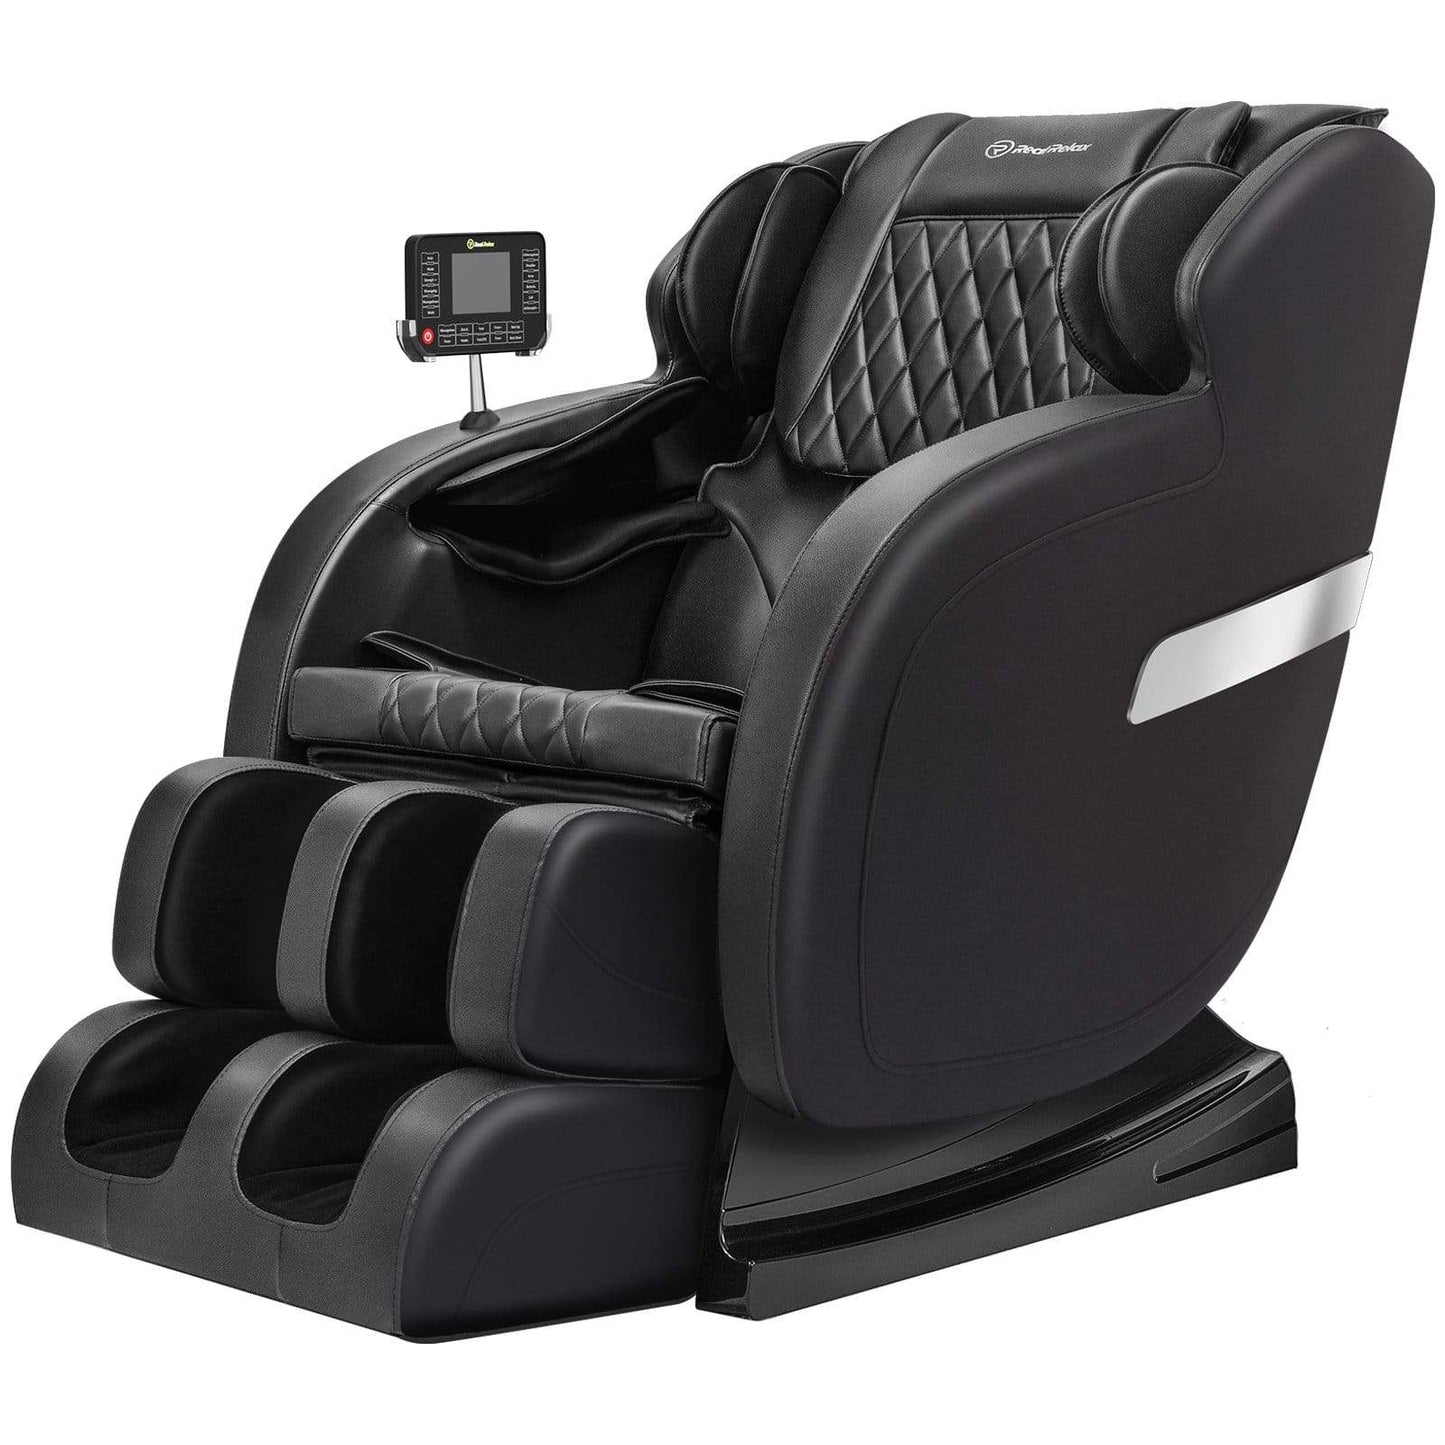 Real Relax Massage Chair Real Relax® Favor-05  Massage Chair black